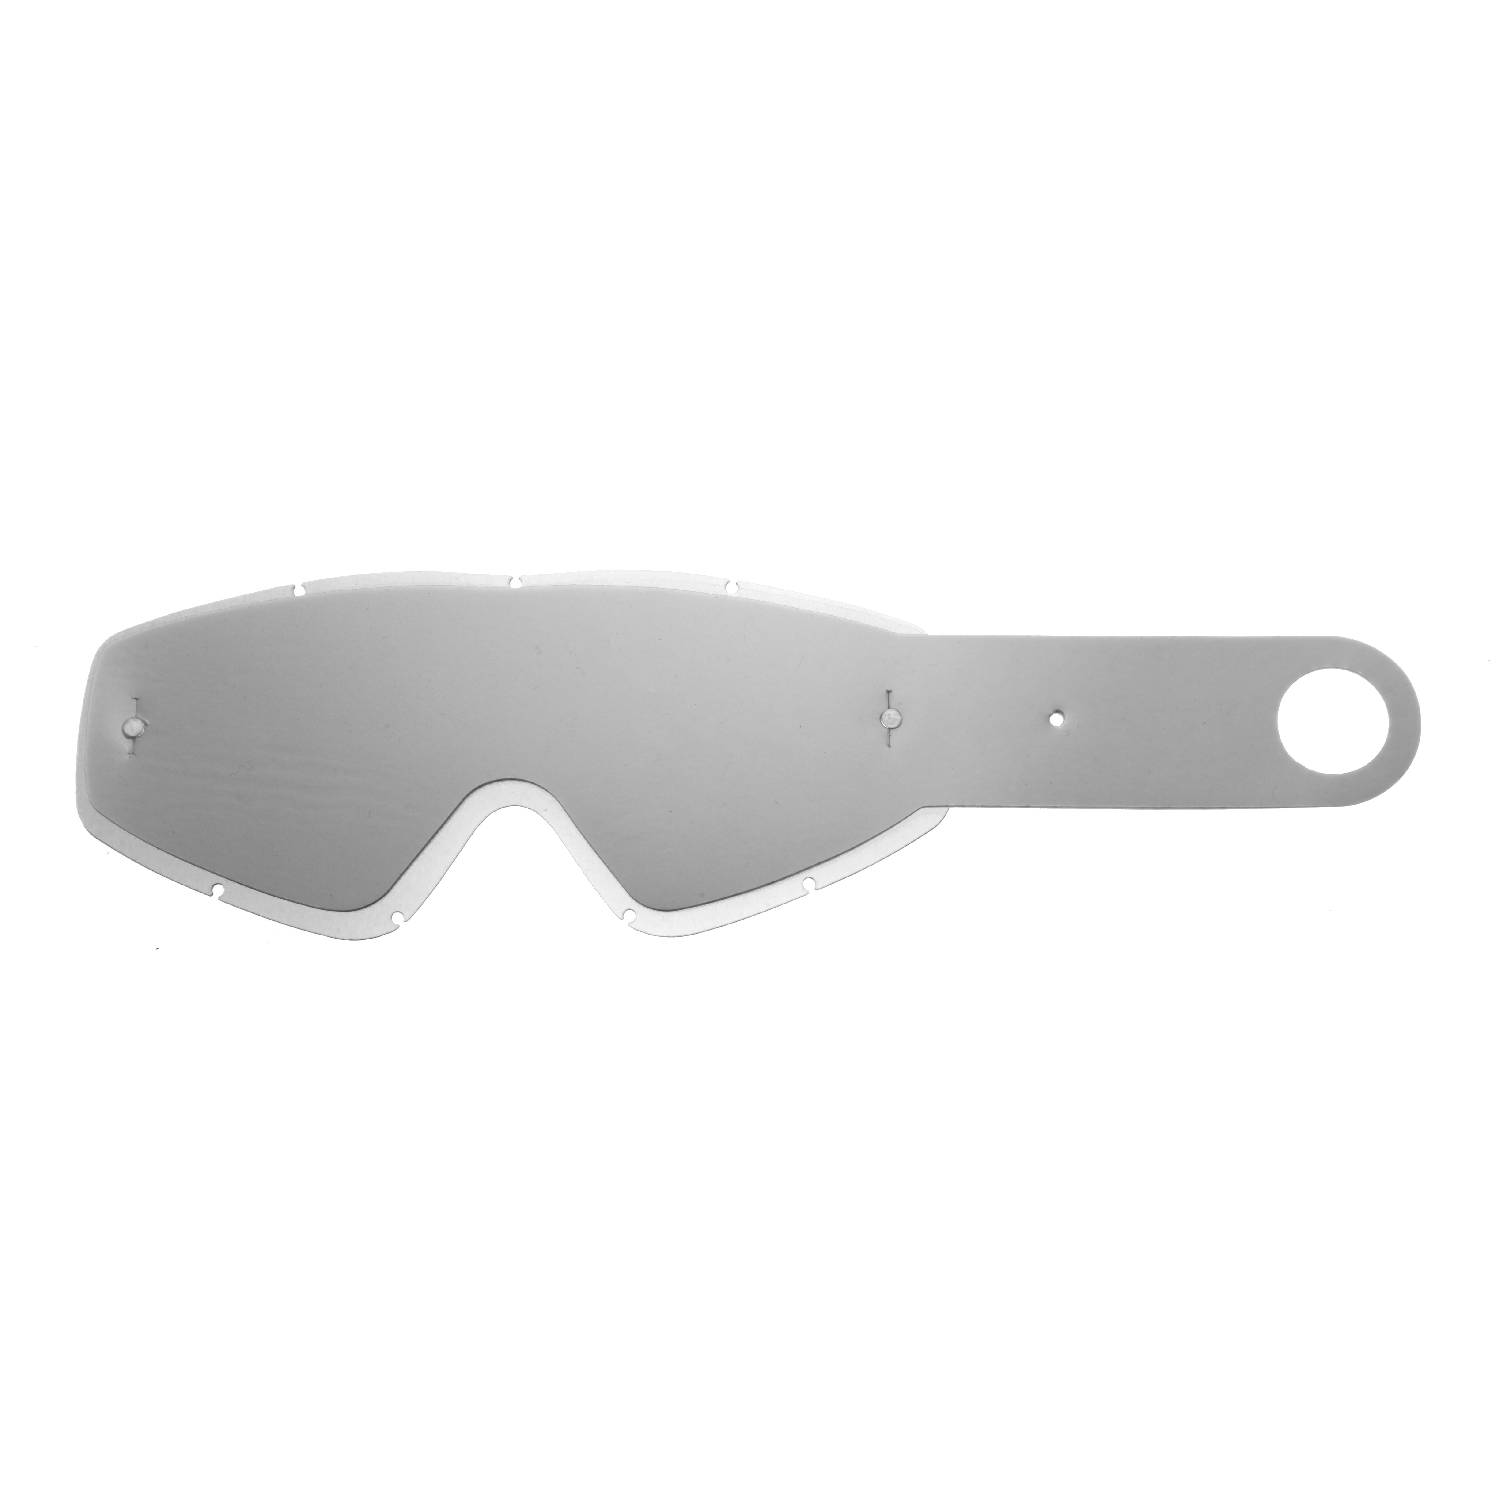 combo lenses with clear lenses with 10 tear off compatible for Eks goggle